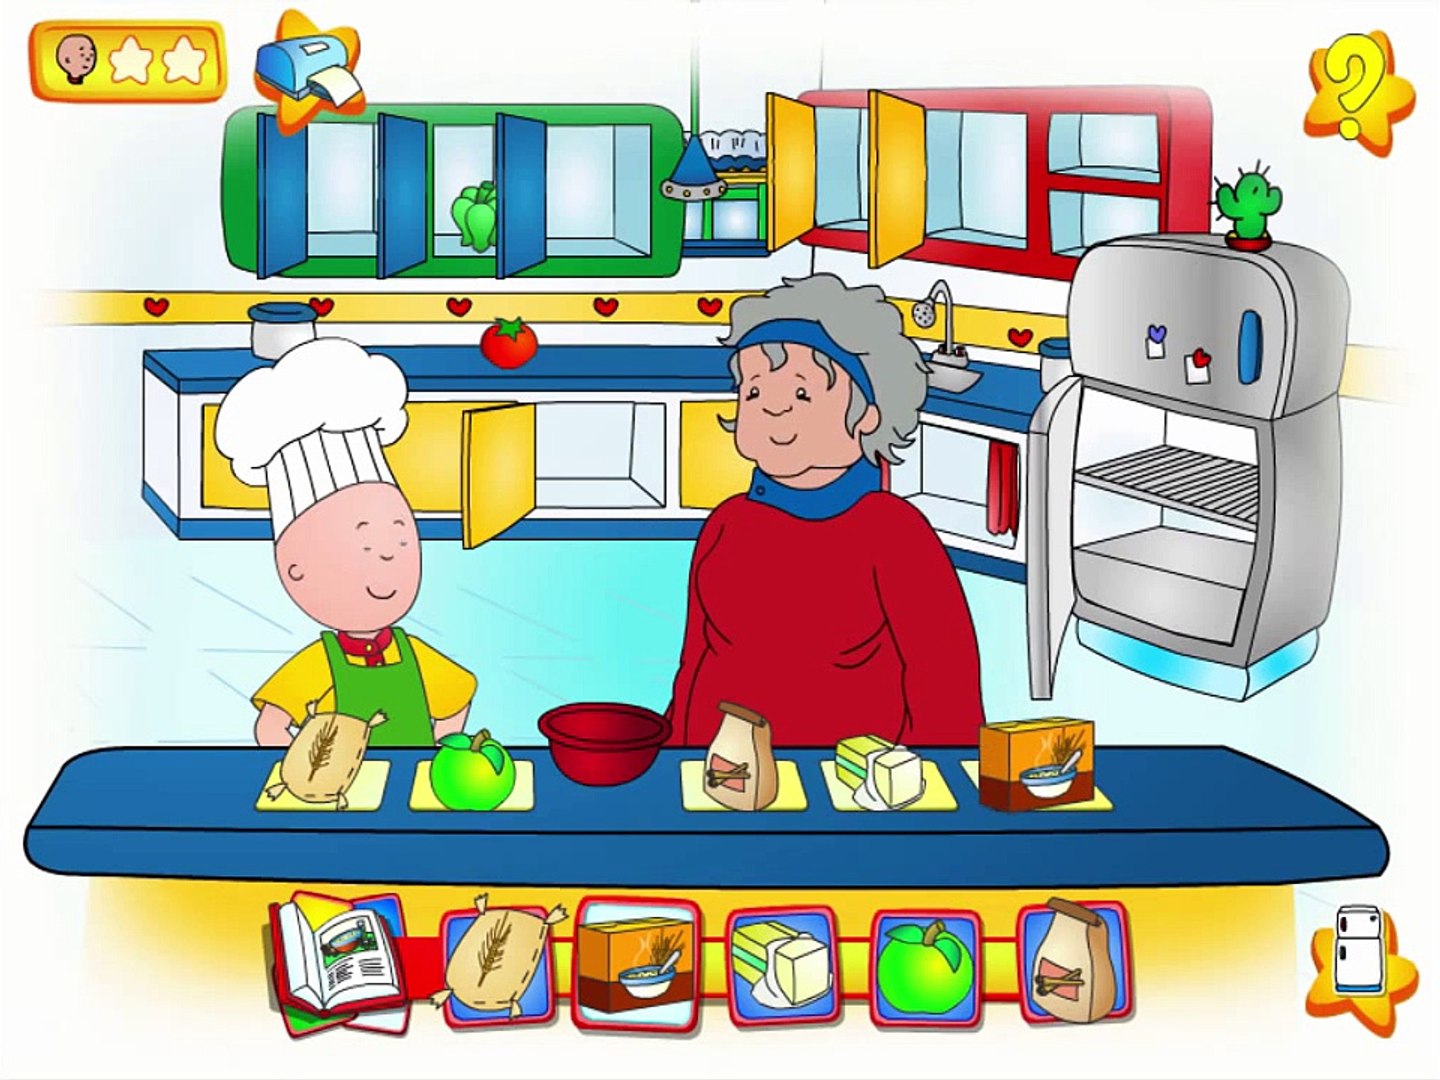 Caillou Cooking With Grandma Cartoon Animation Pbs Kids Game Play